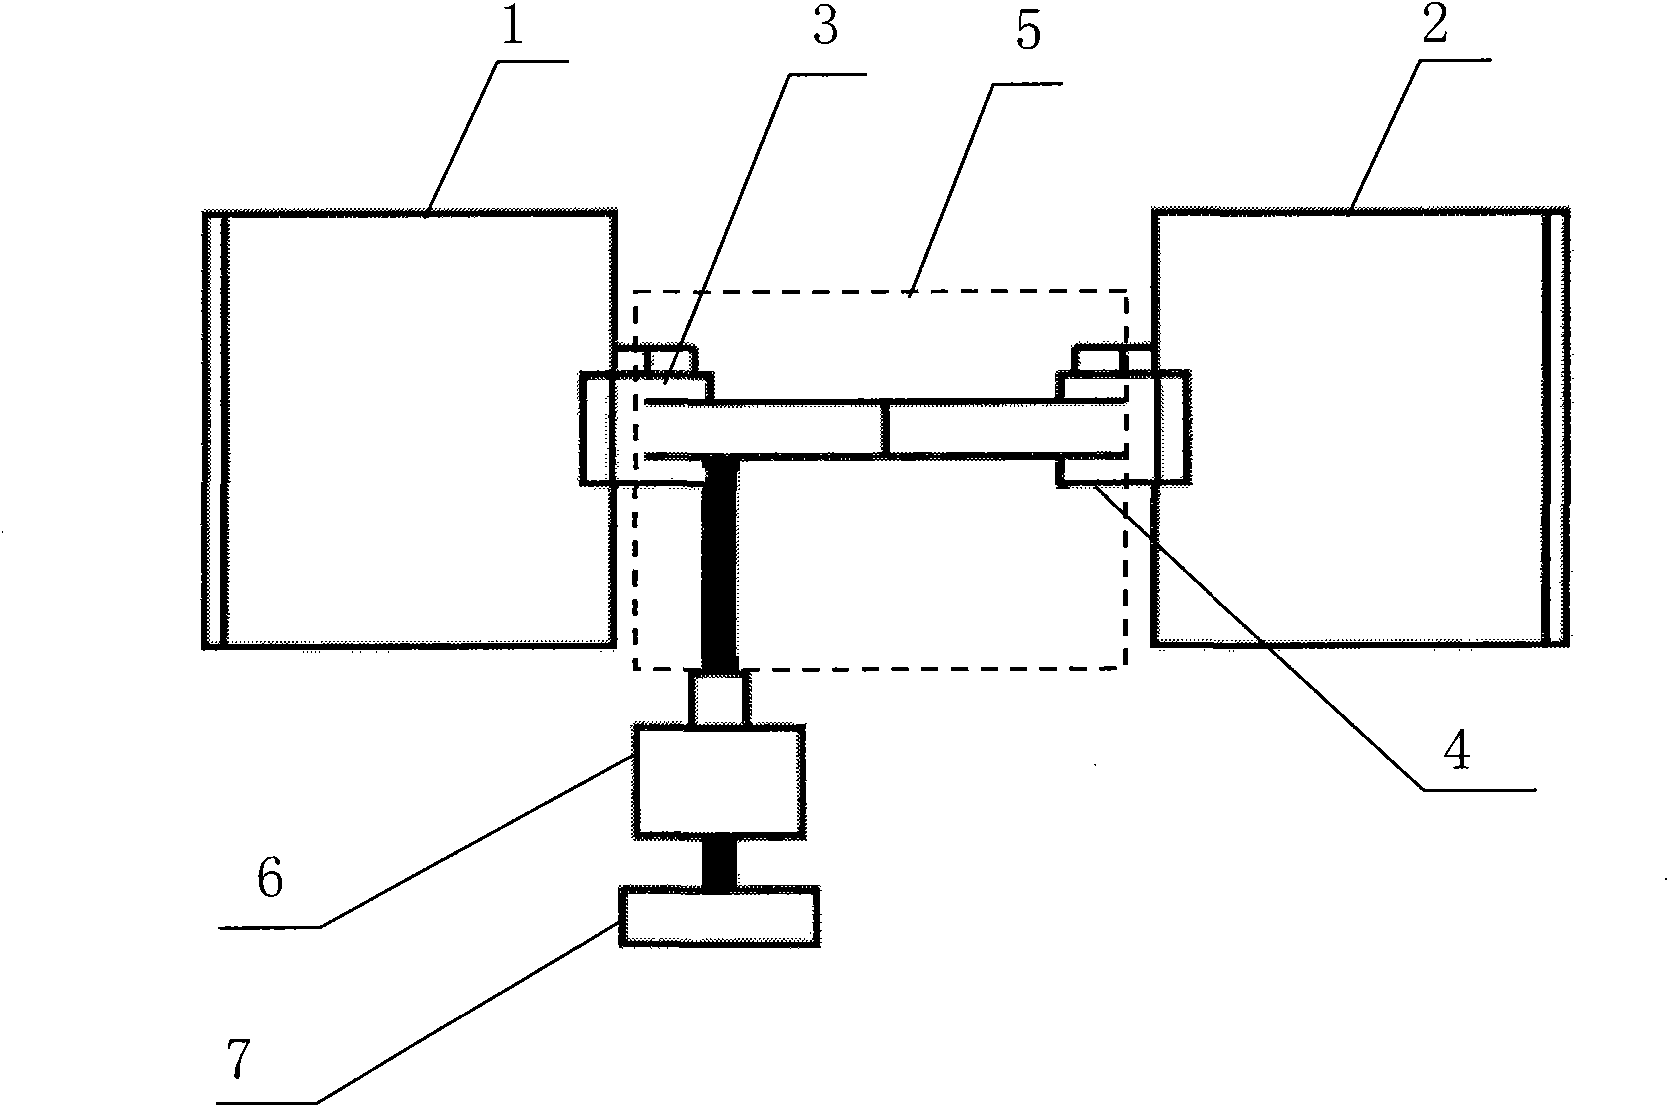 Attenuation device capable of adjusting light beam energy